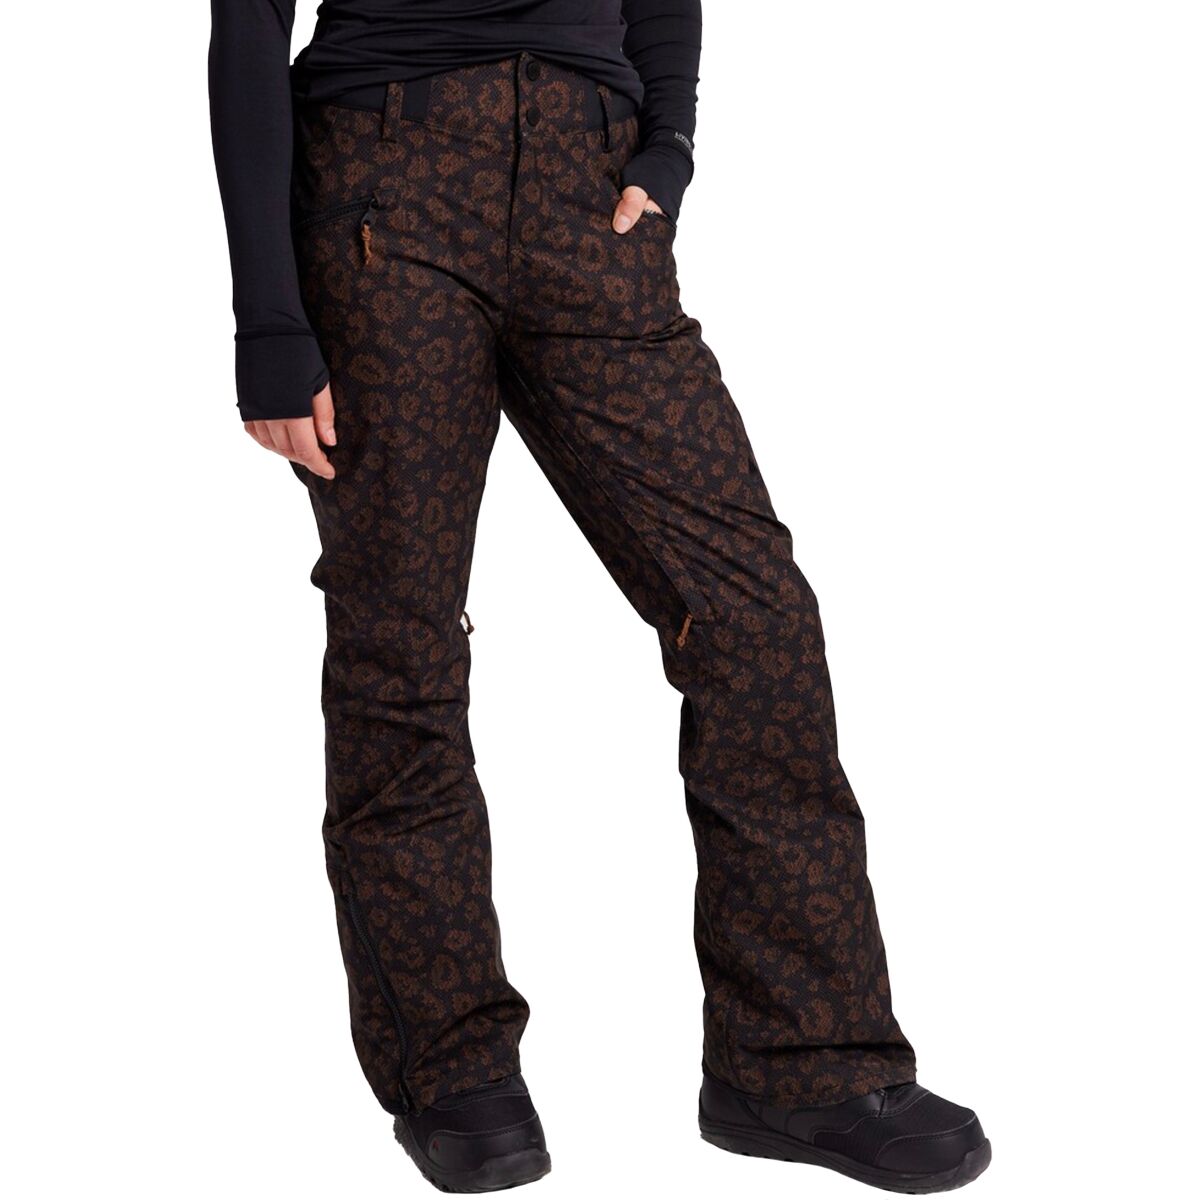 Marcy High Rise Pant - Women